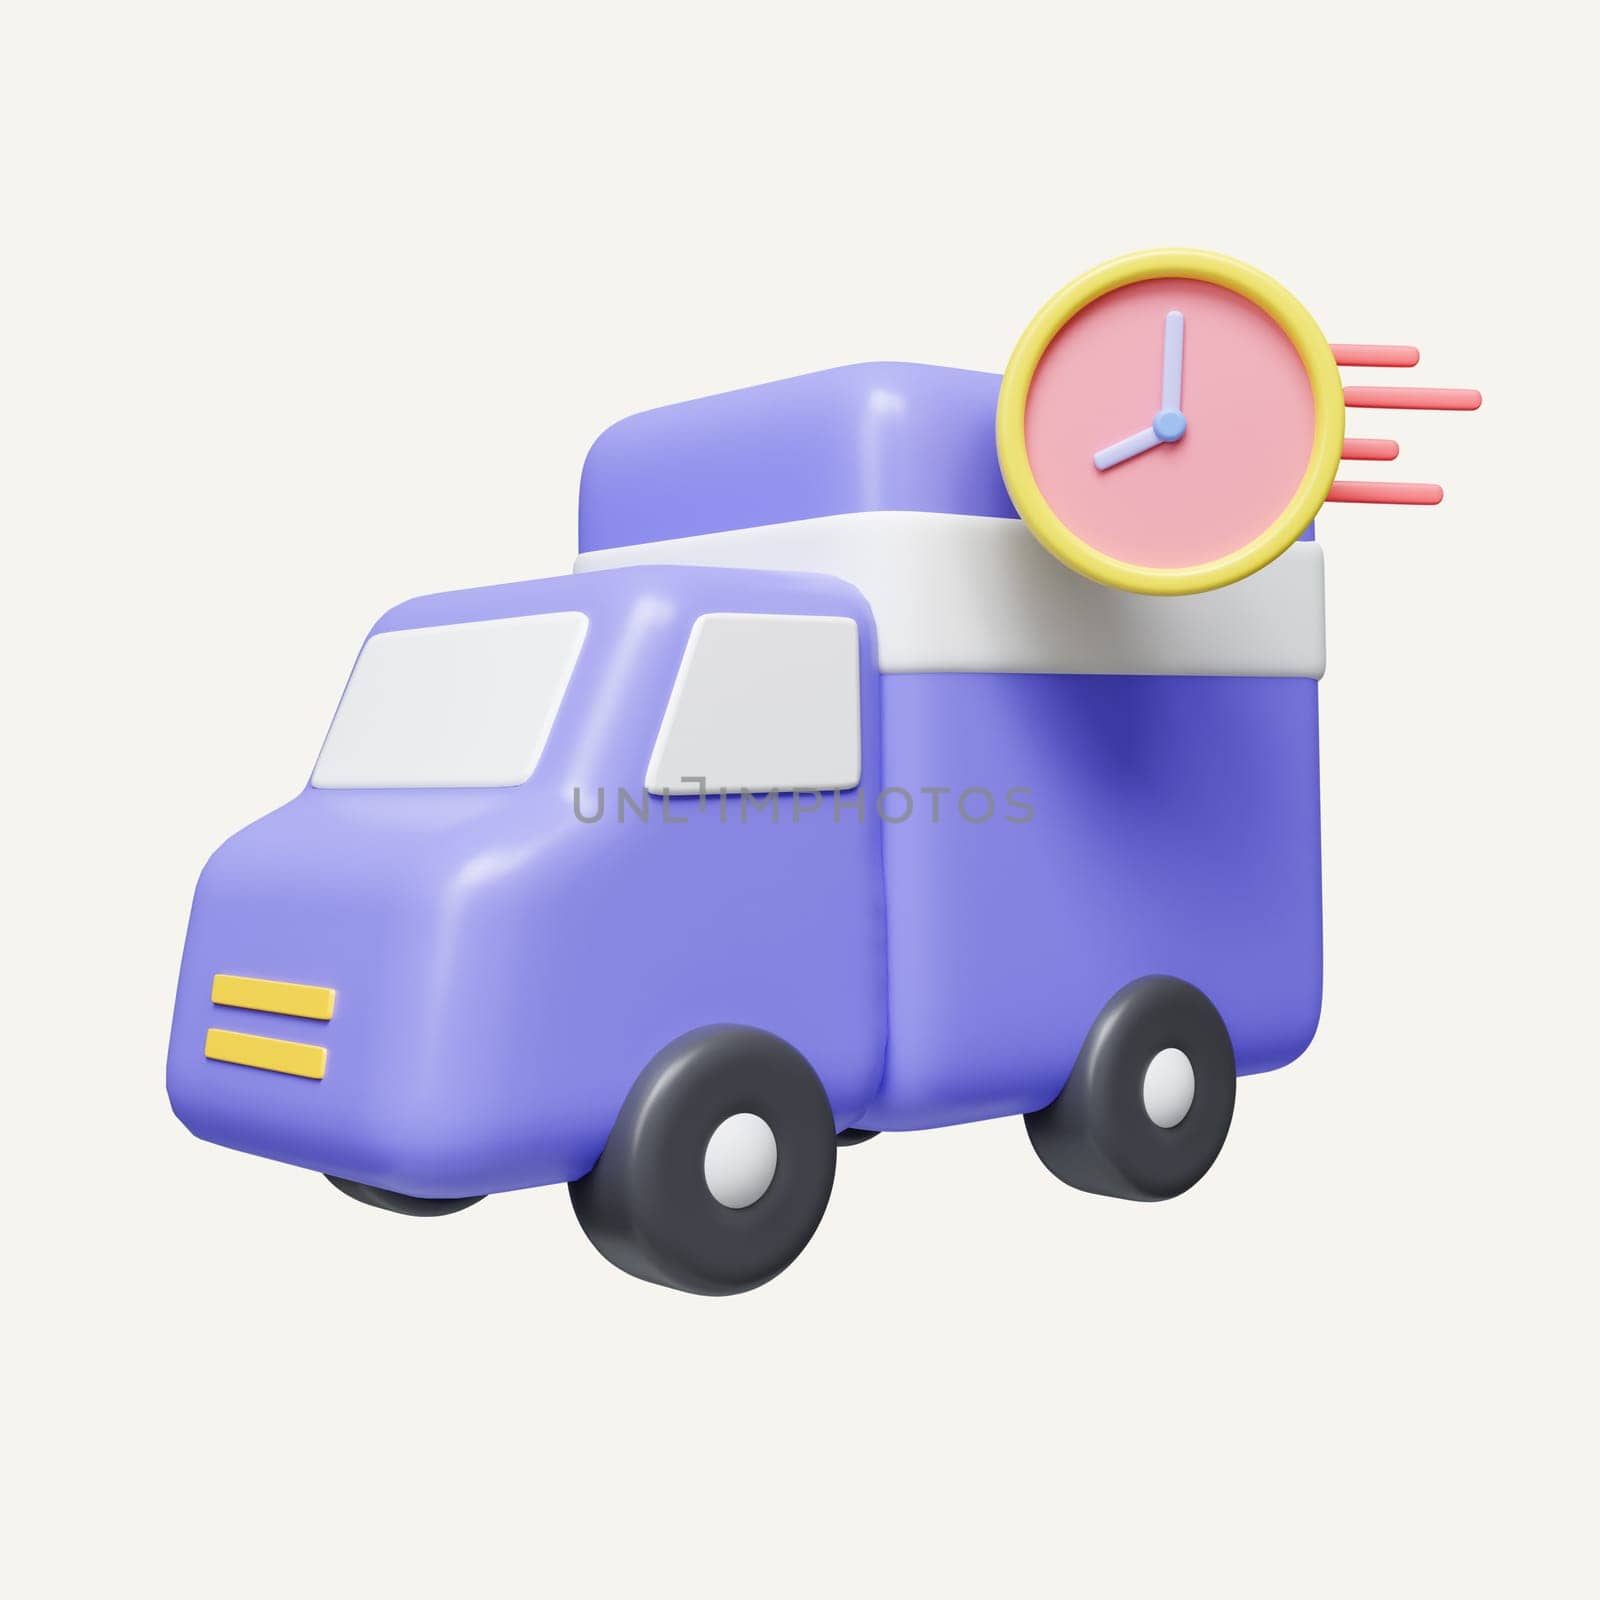 3d fast delivery concept. delivery truck with clock icon and fast icon. quick delivery service. icon isolated on white background. 3d rendering illustration. Clipping path..